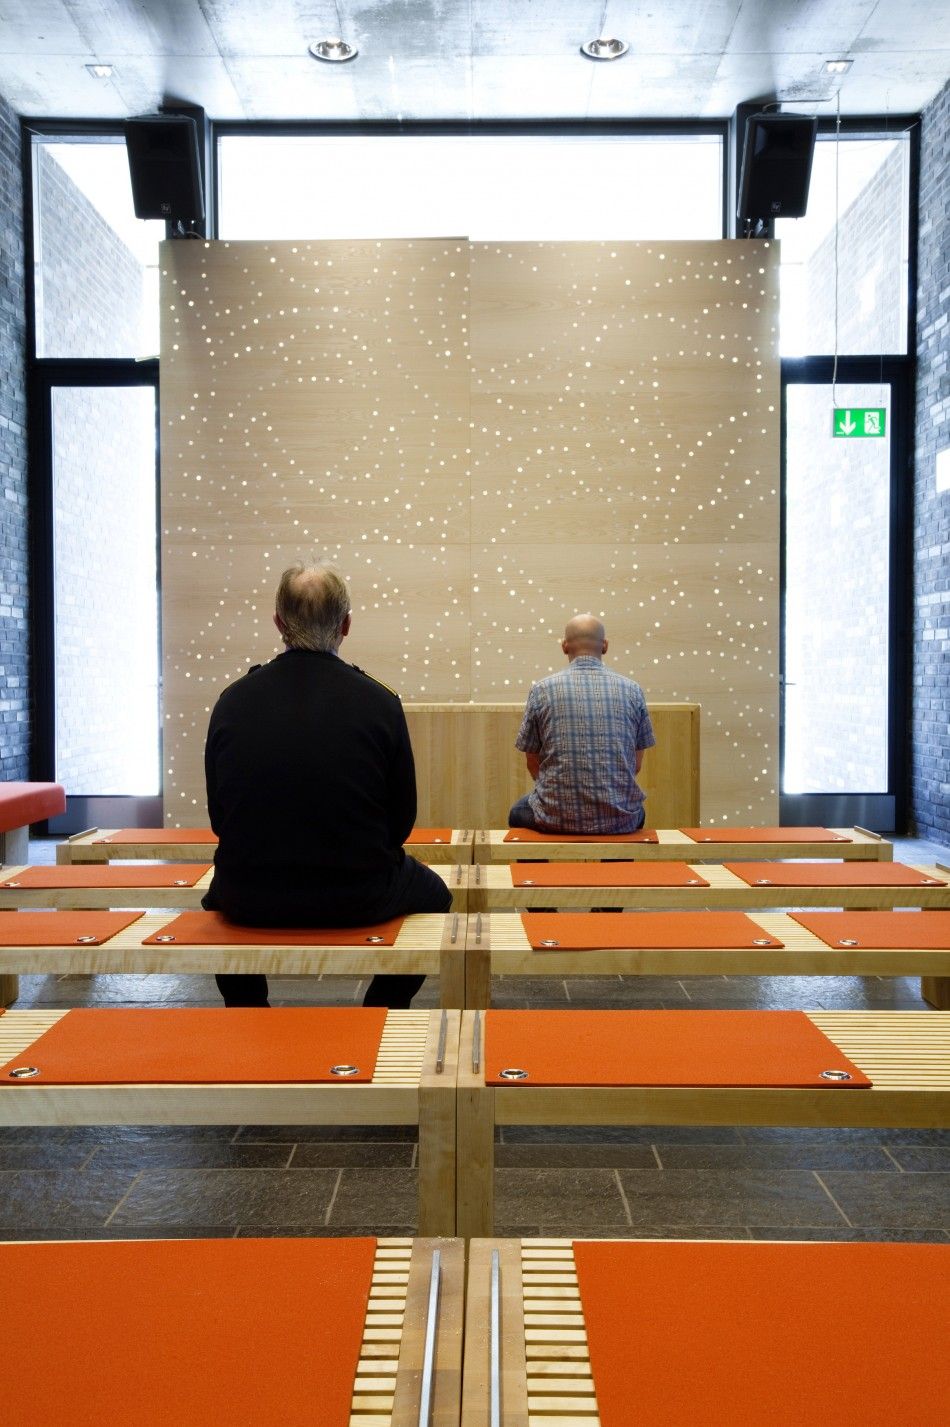 Two men sit inside the chapel at Halden prison in the far southeast of Norway in this picture taken in 2010